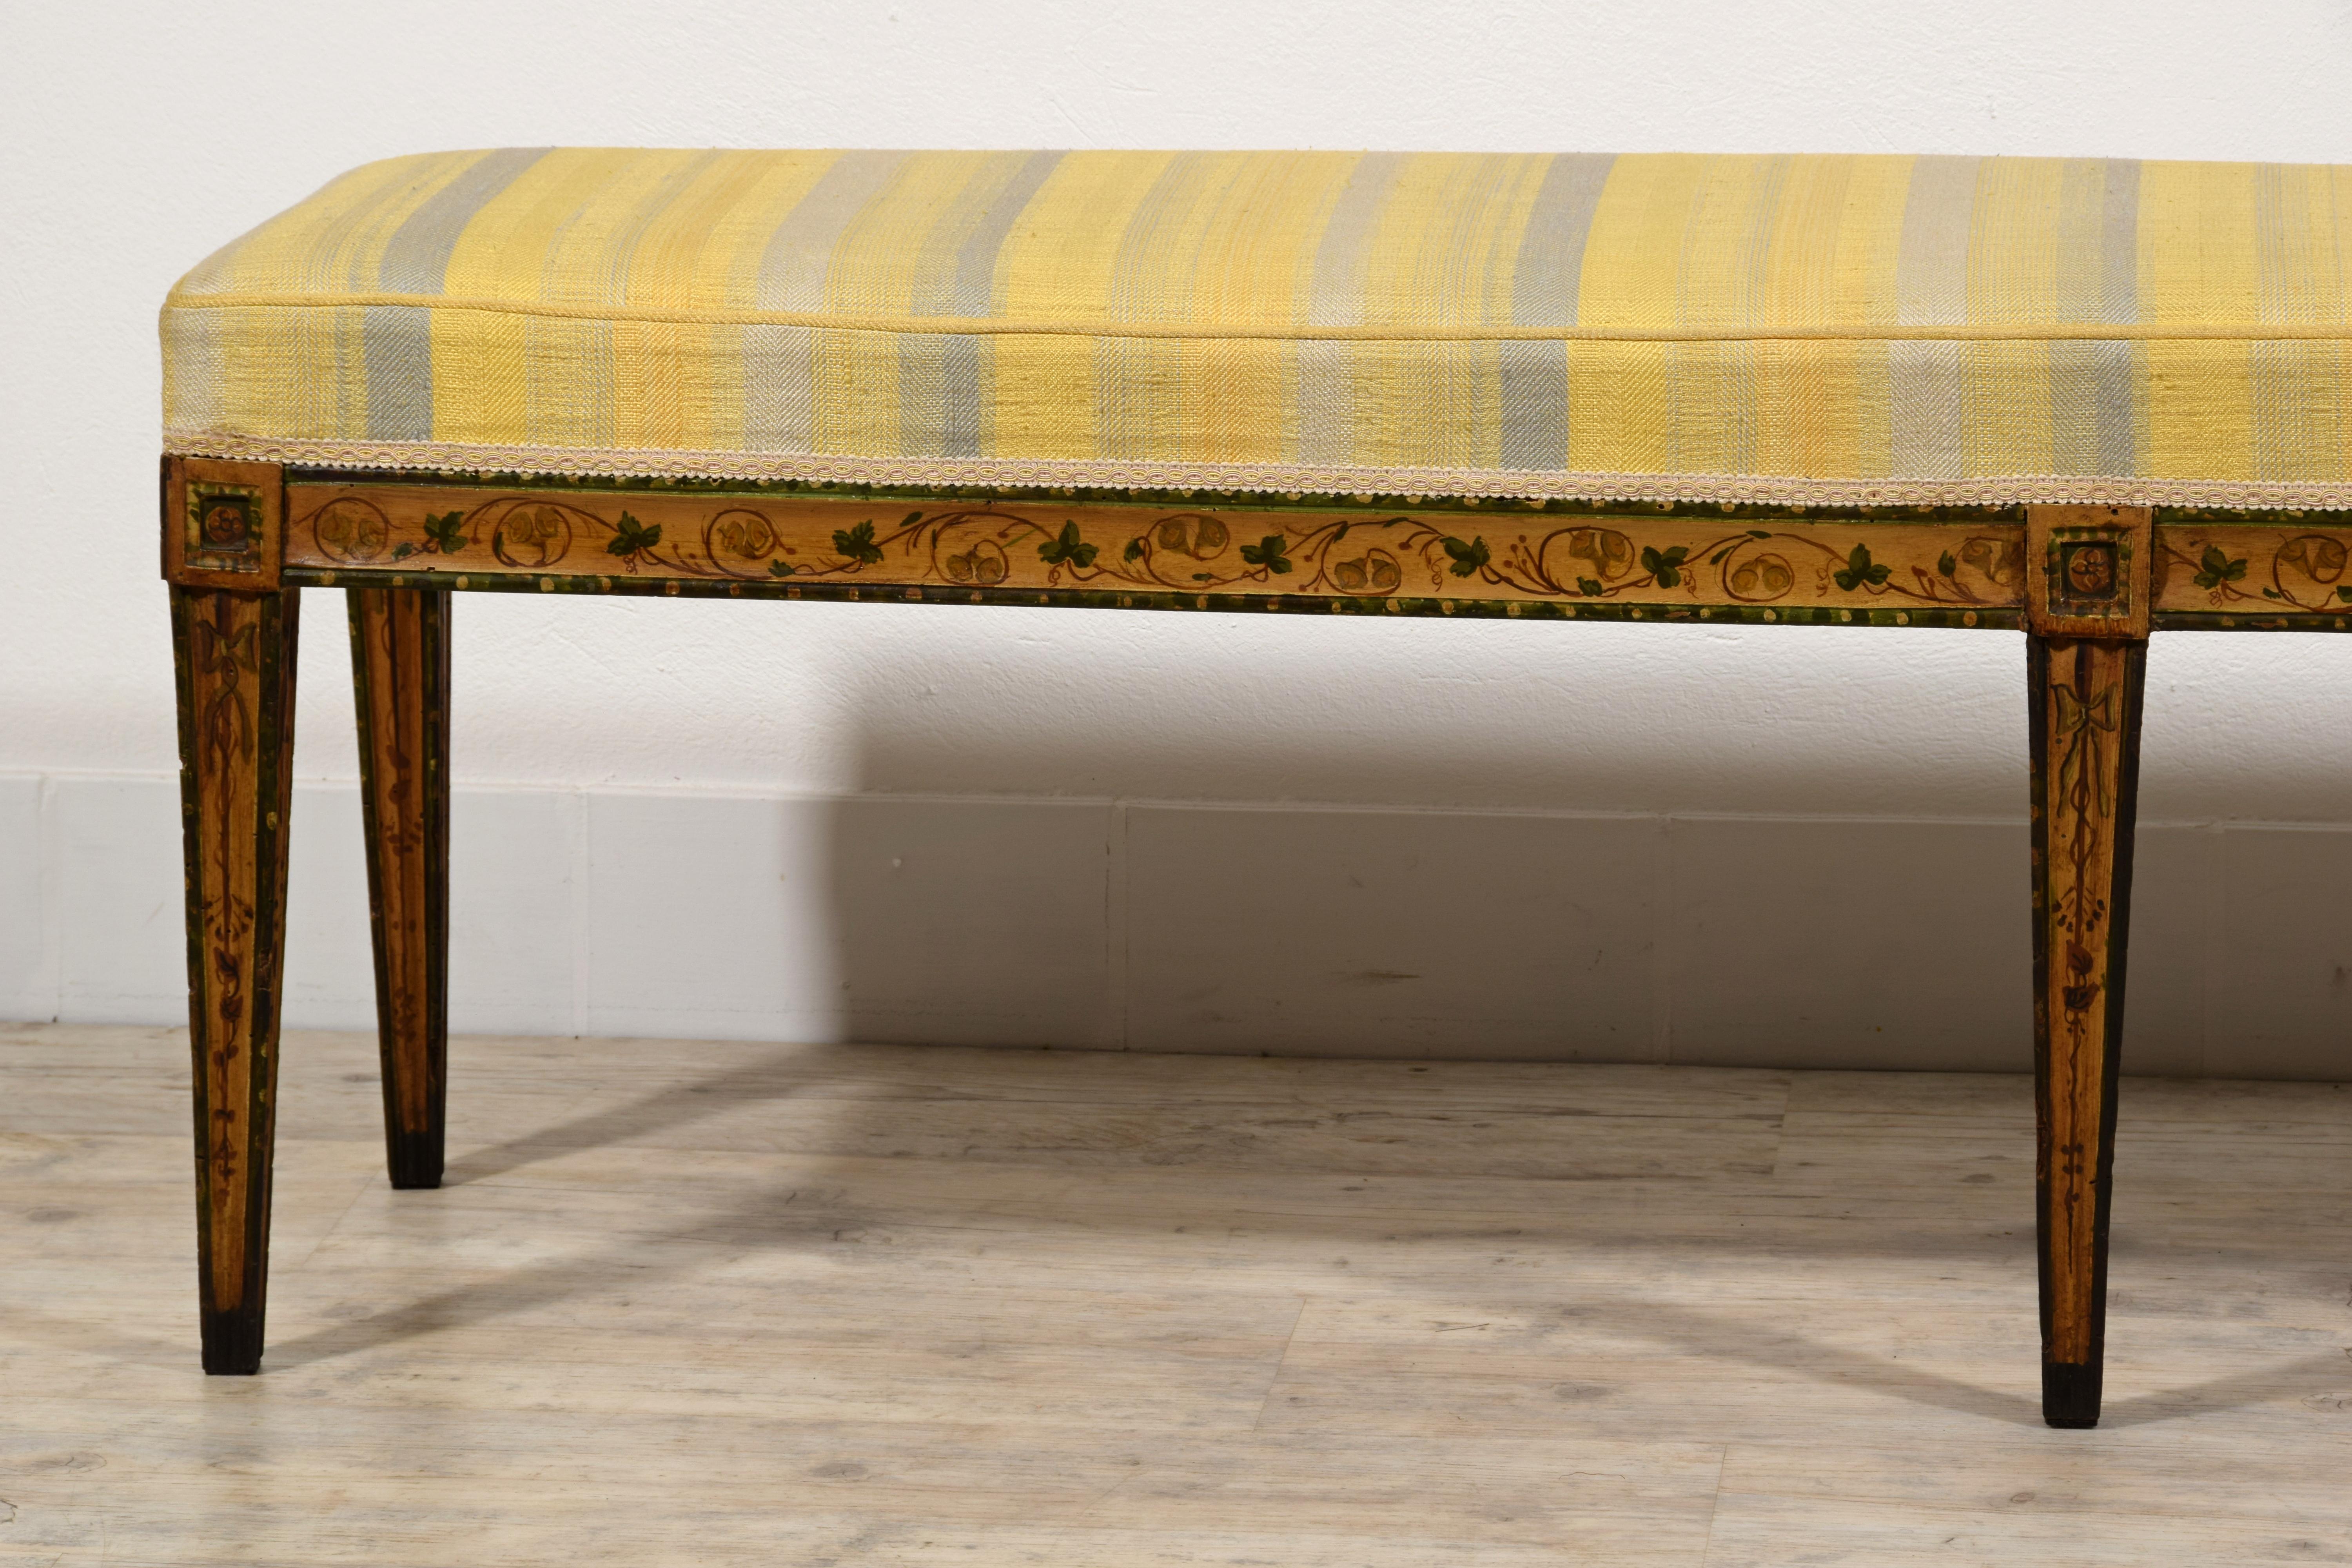 19th Century, Italian Six-legged Centre Bench Lacquered Wood with Ramage Motive 2